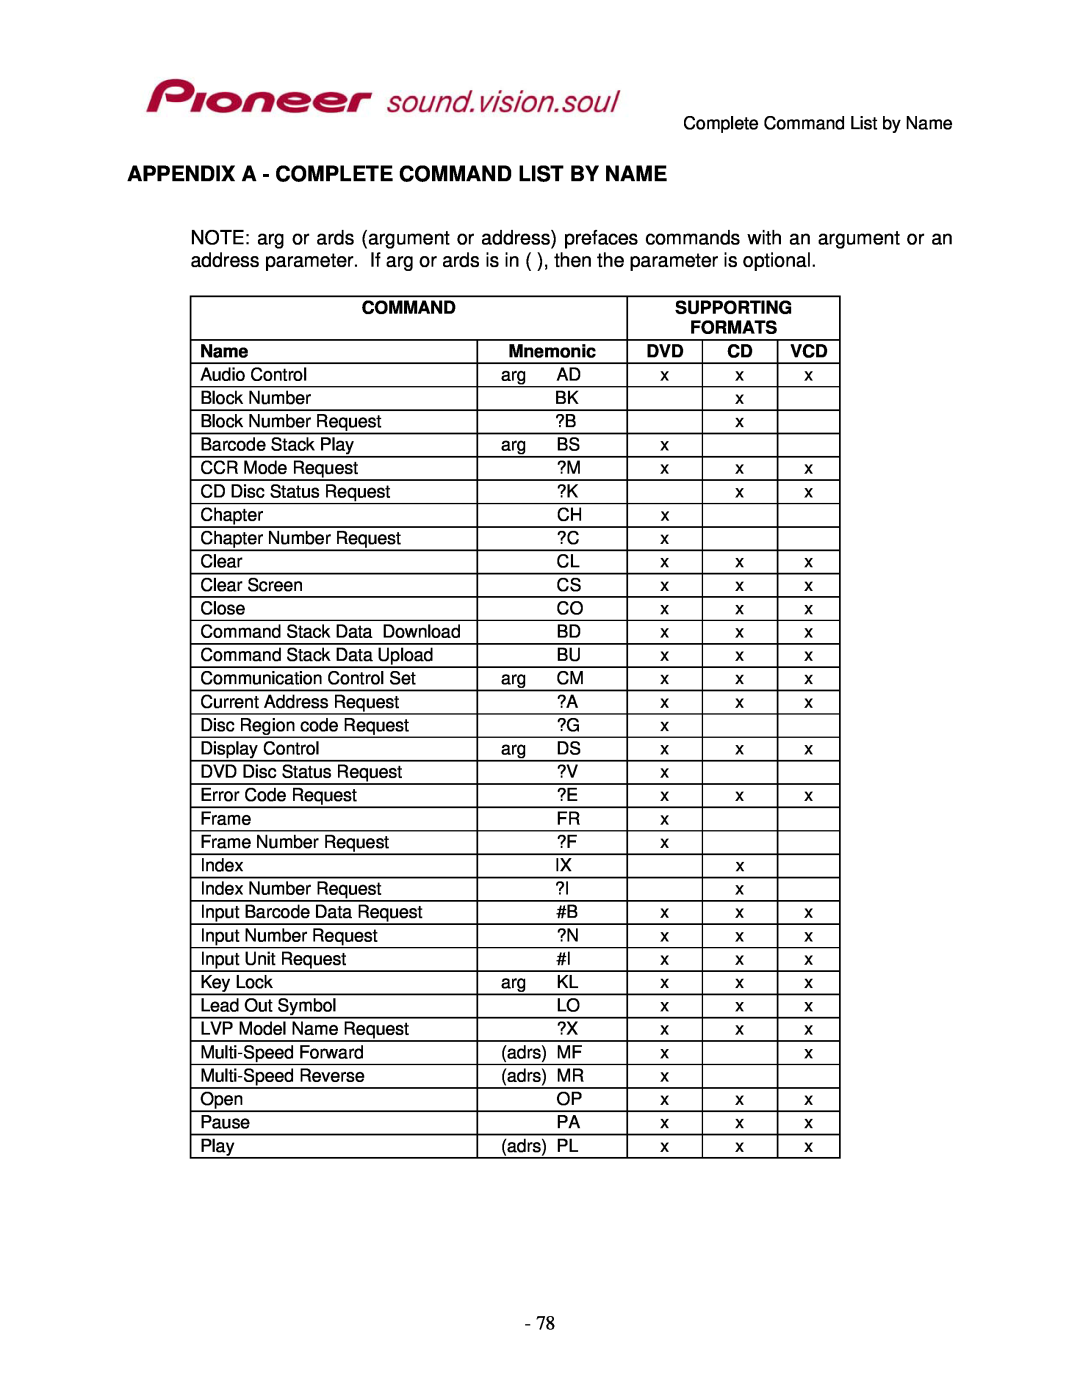 Pioneer RS-232C manual Appendix A - Complete Command List By Name, Supporting, Formats, Mnemonic 